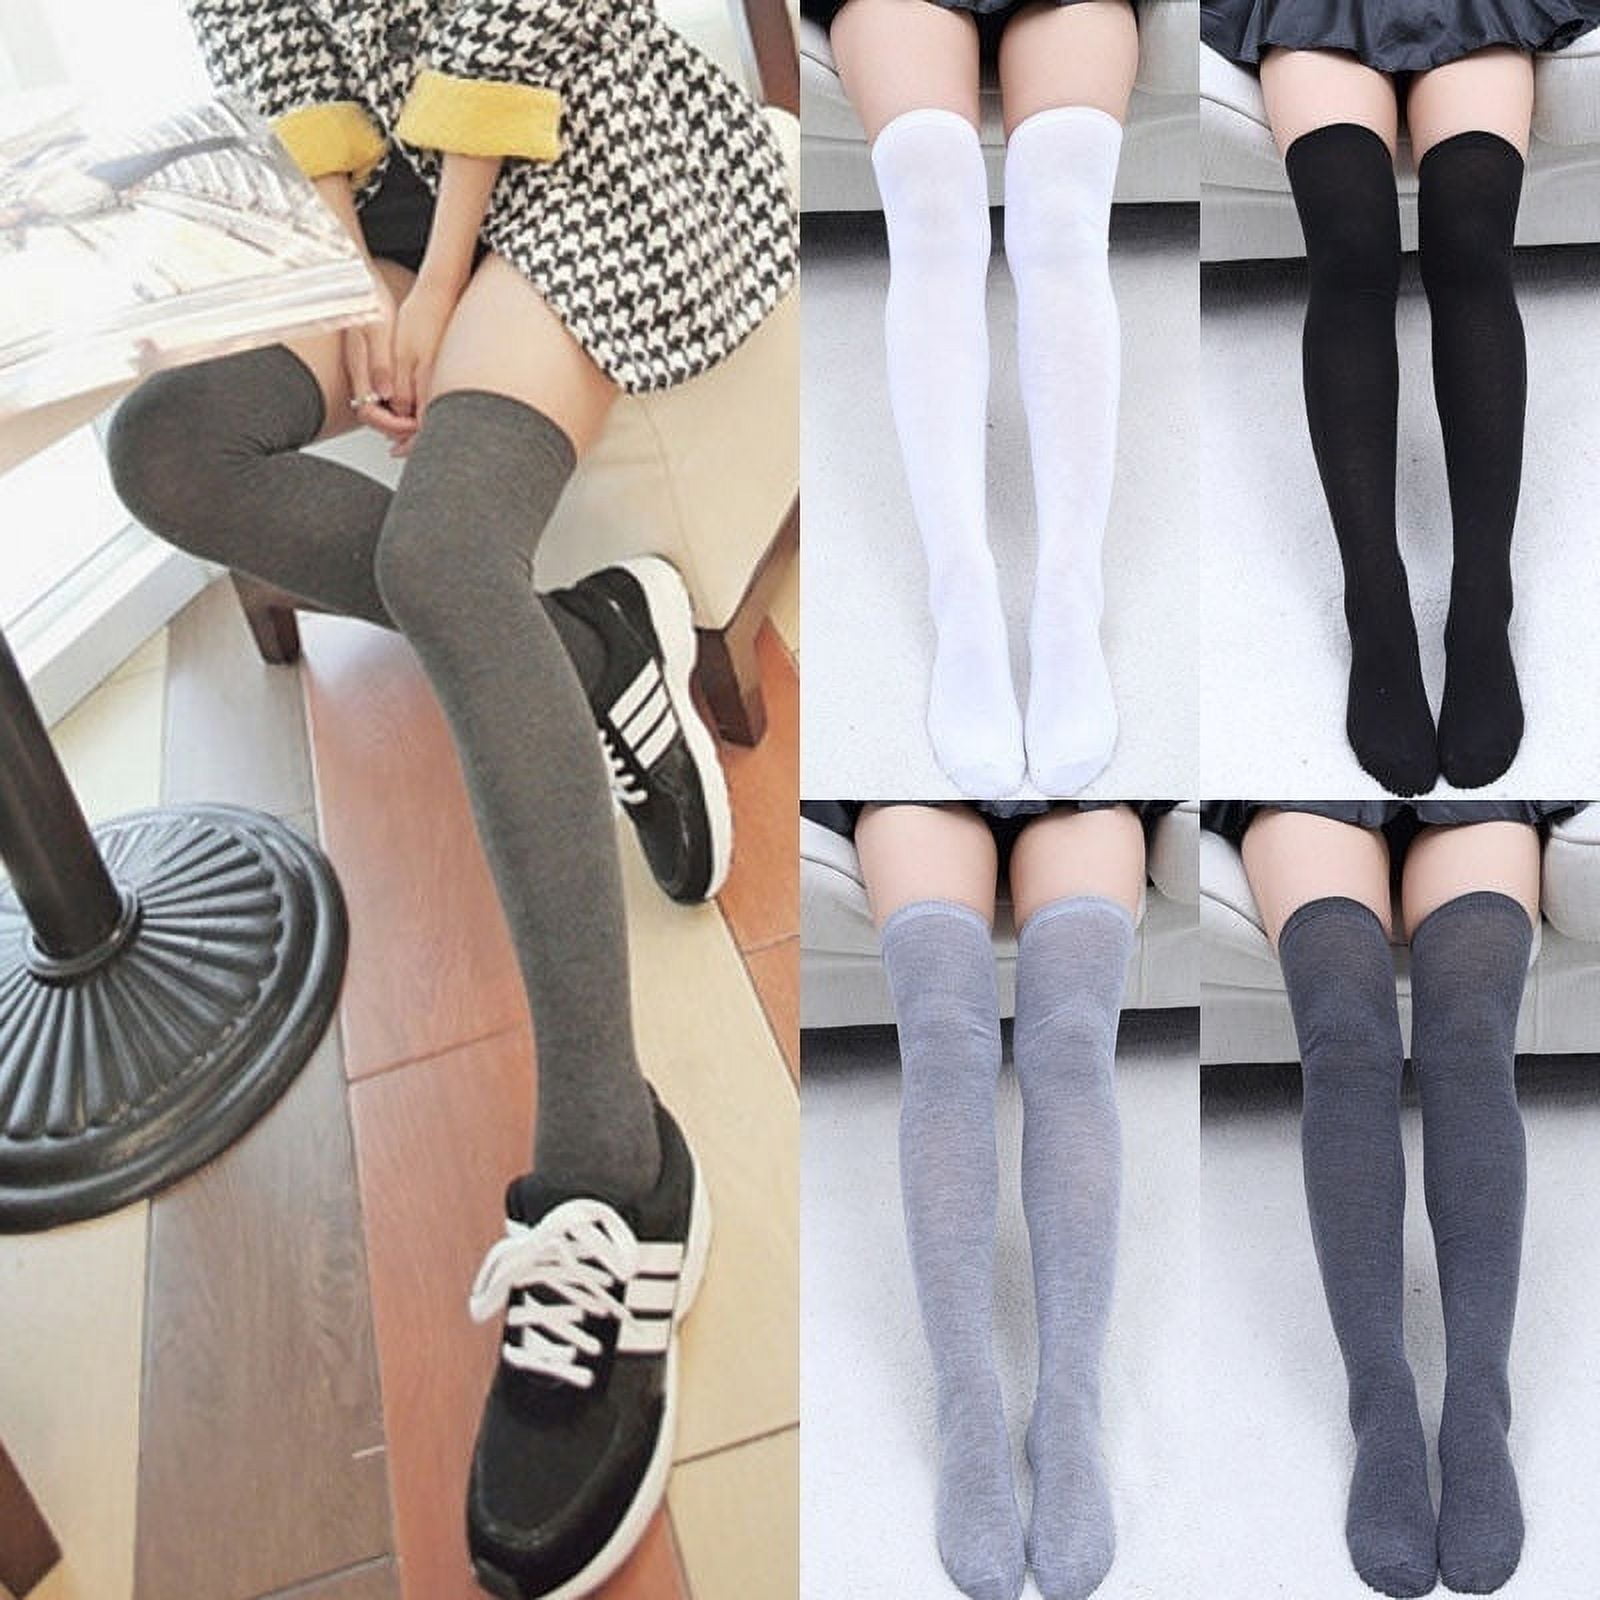 Women Knit Cotton Over The Knee Long Socks Striped Thigh High Stocking ...